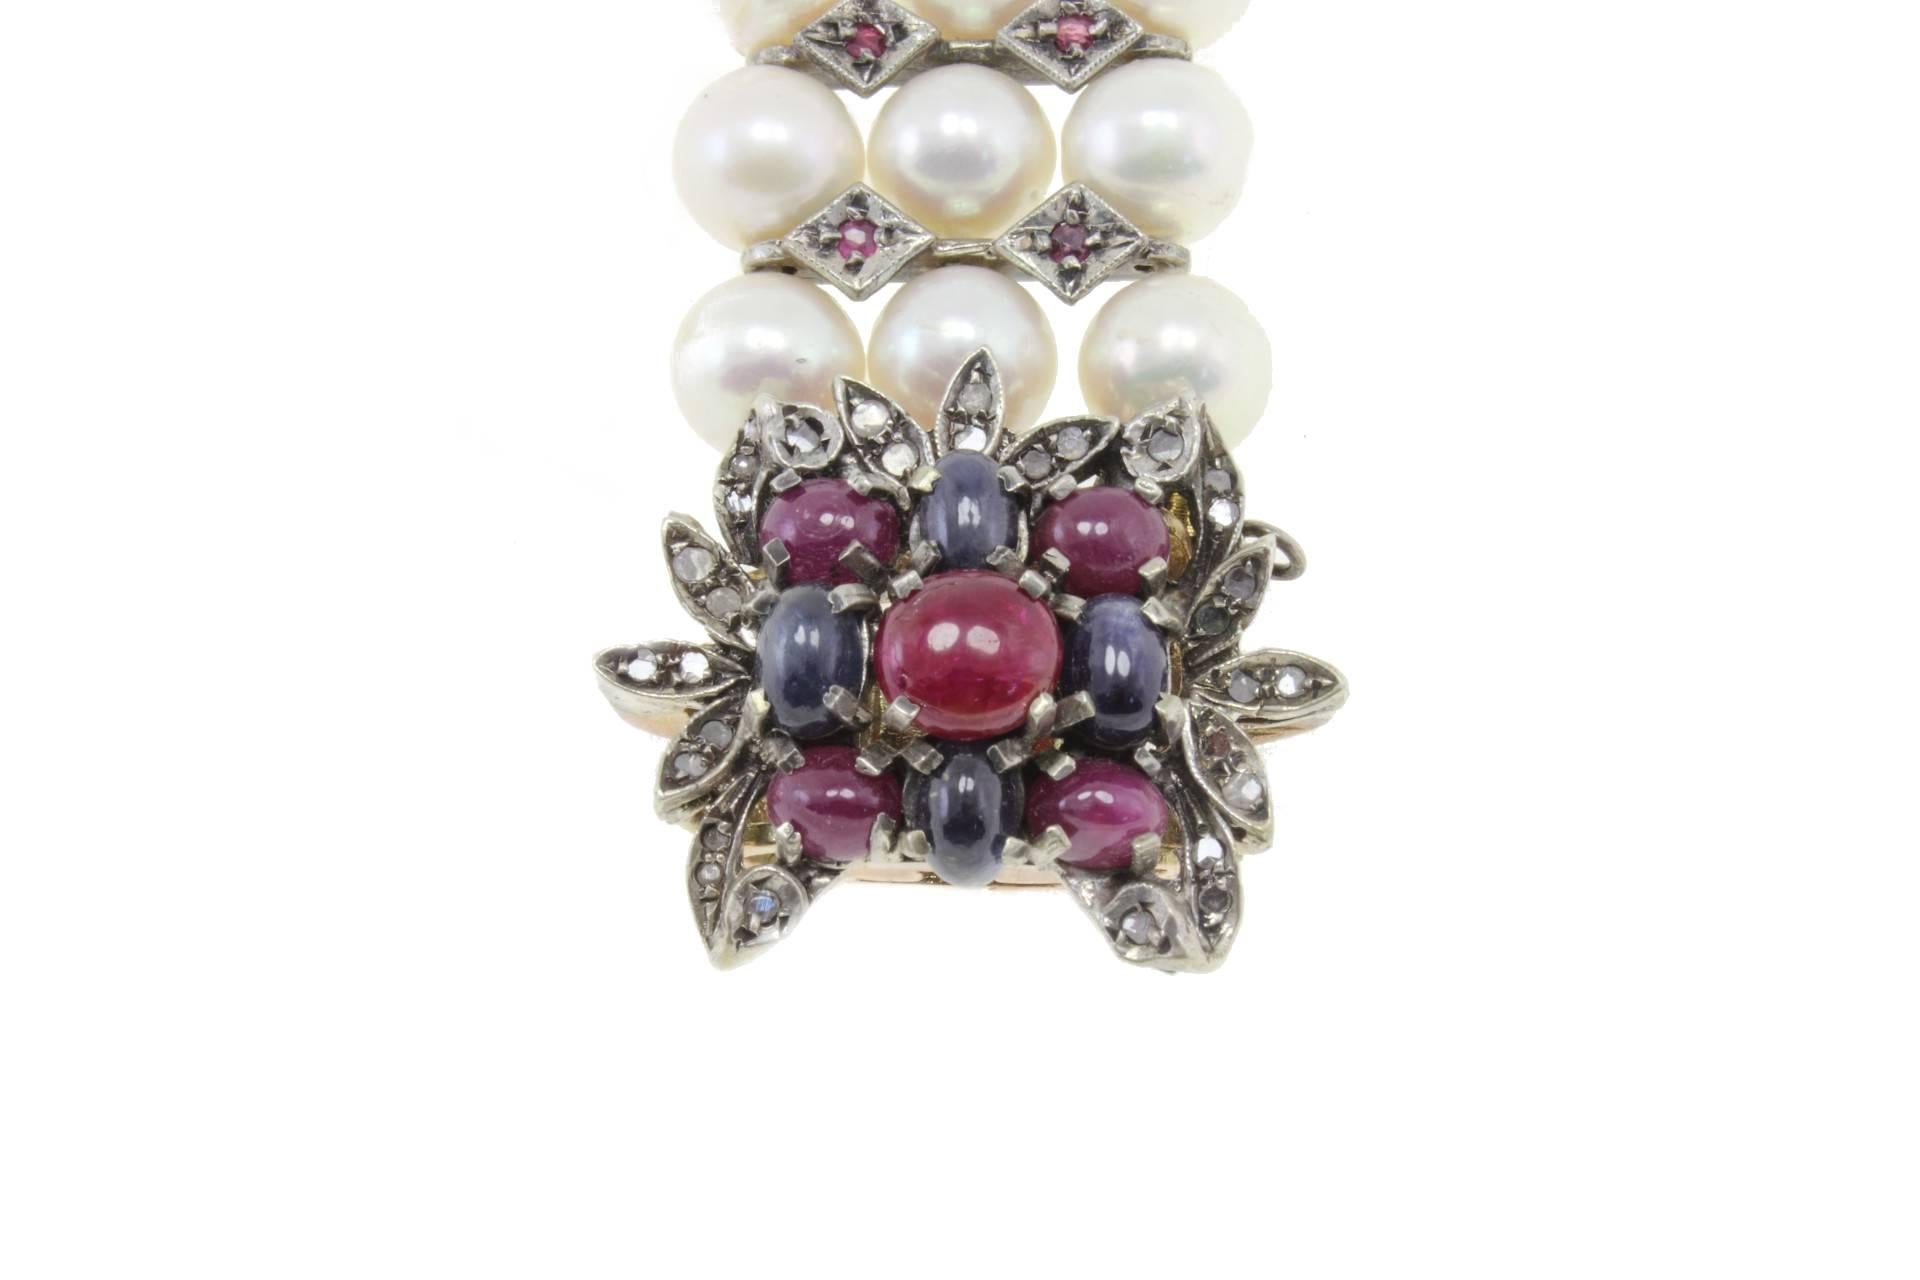 Women's Luise Diamonds Blue Sapphires Rubies Pearls Gold and Silver Bracelet